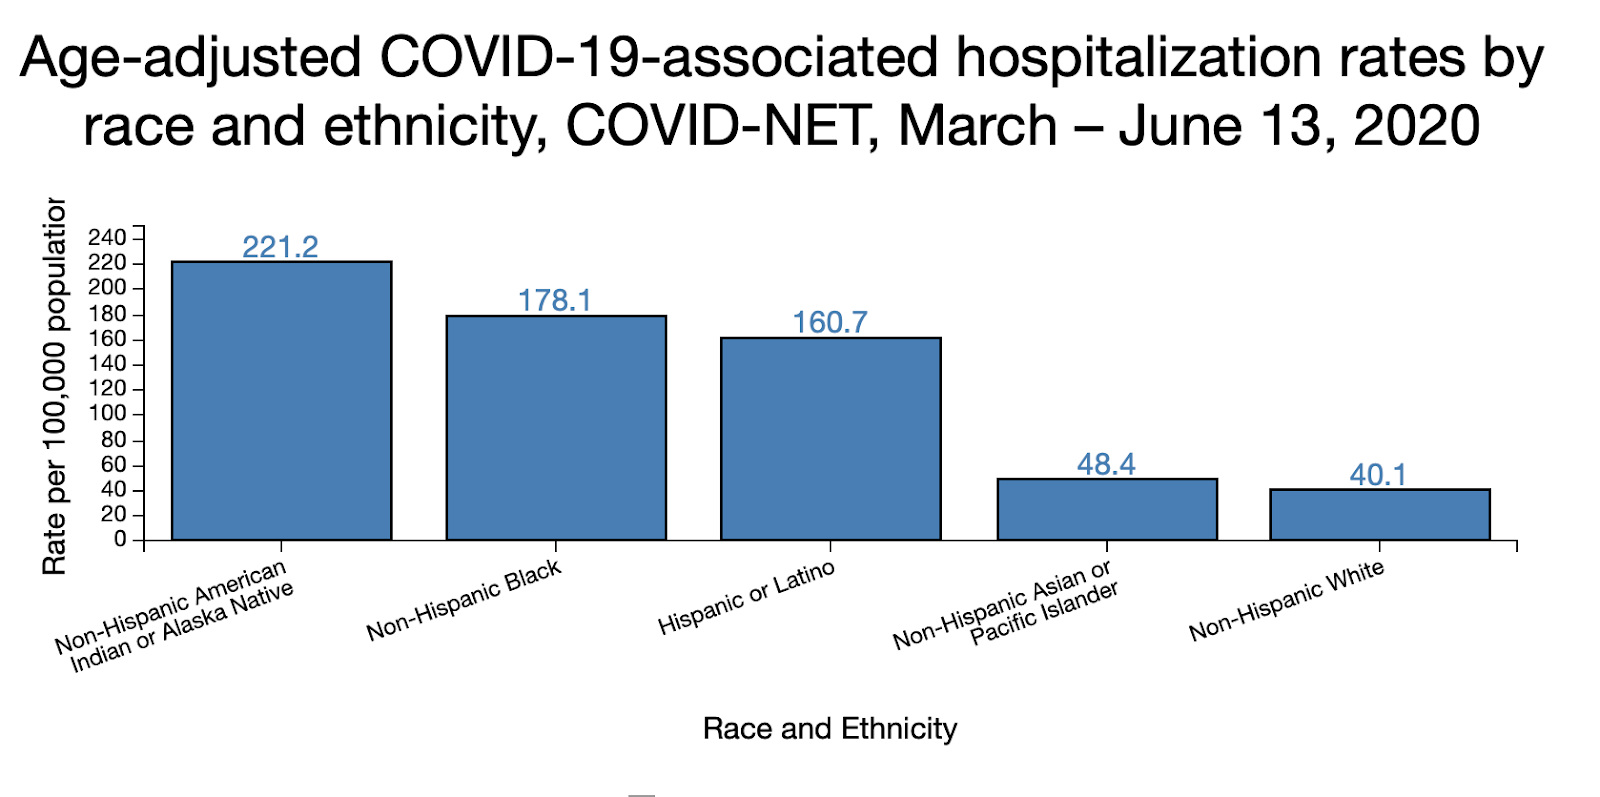 CDC COVID-19 hospitalizations chart by race and ethnicity